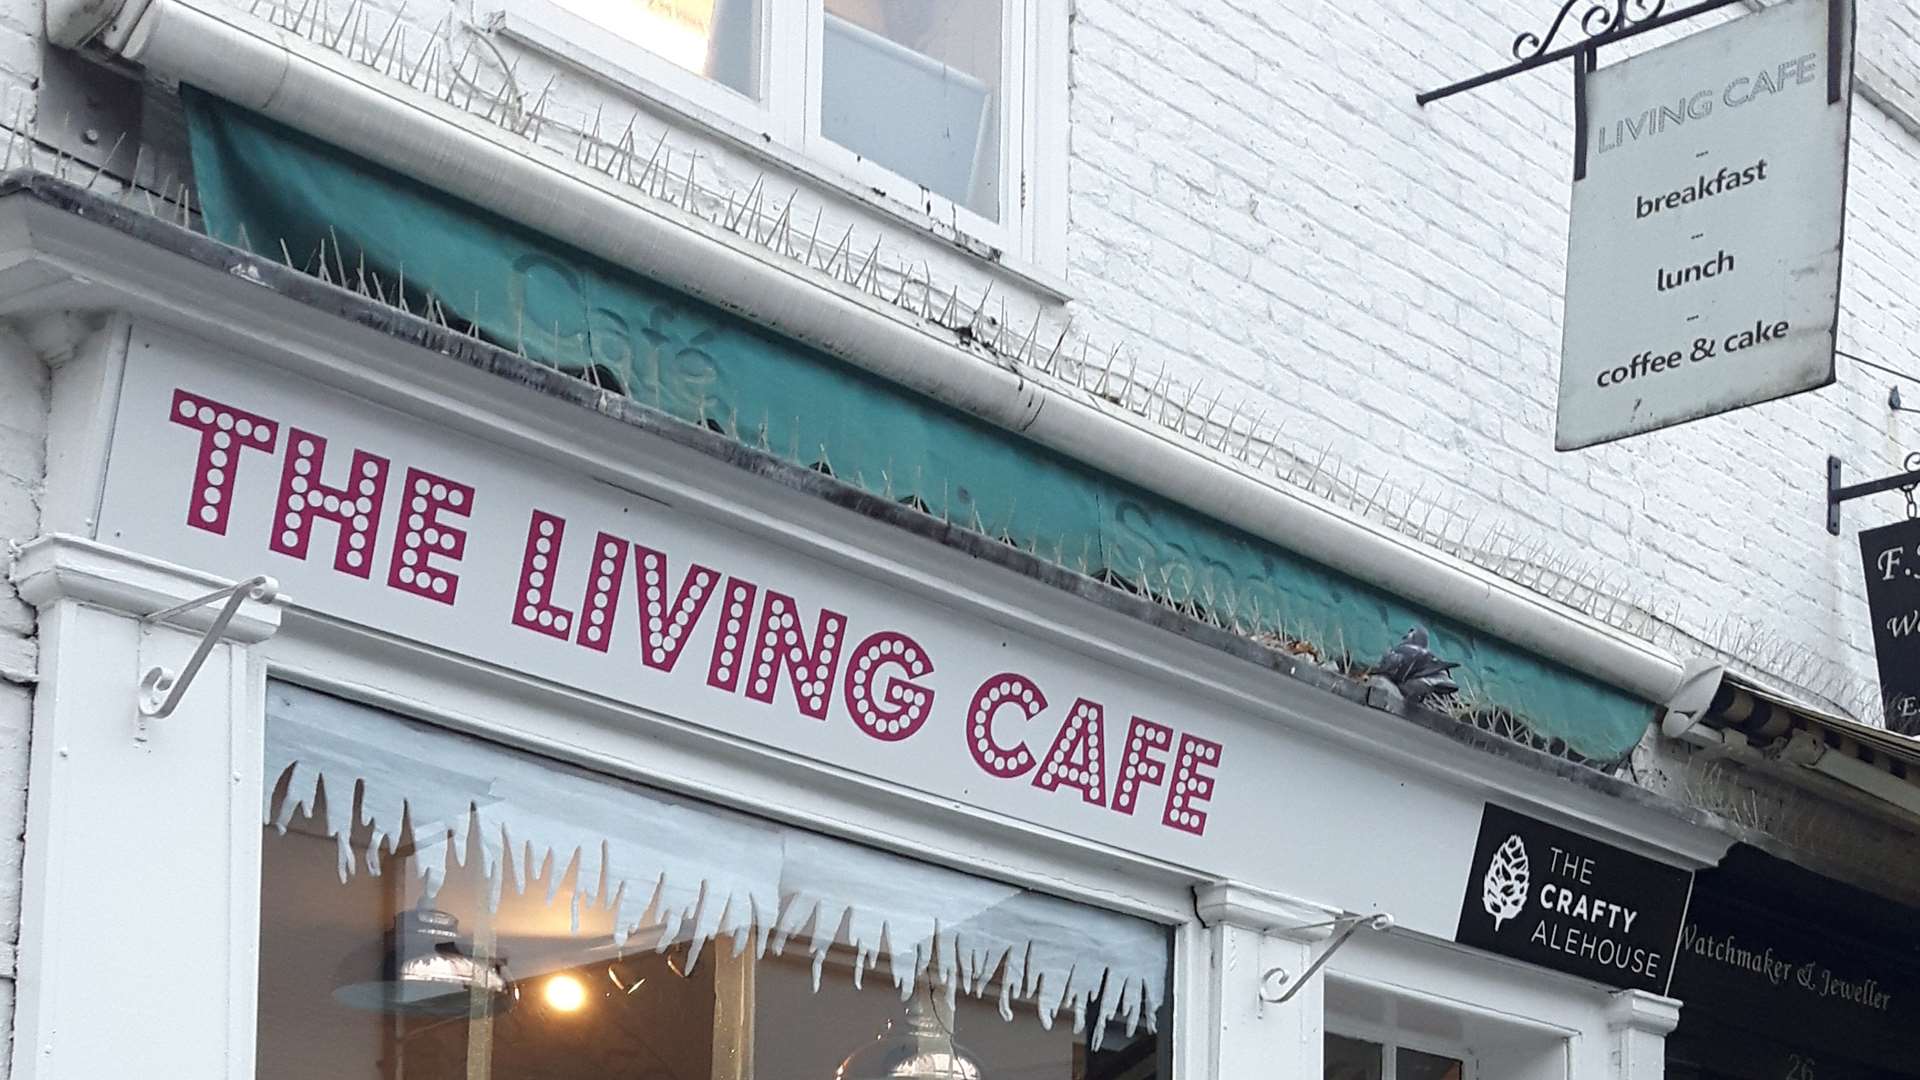 The Living Cafe in Maidstone's Earl Street